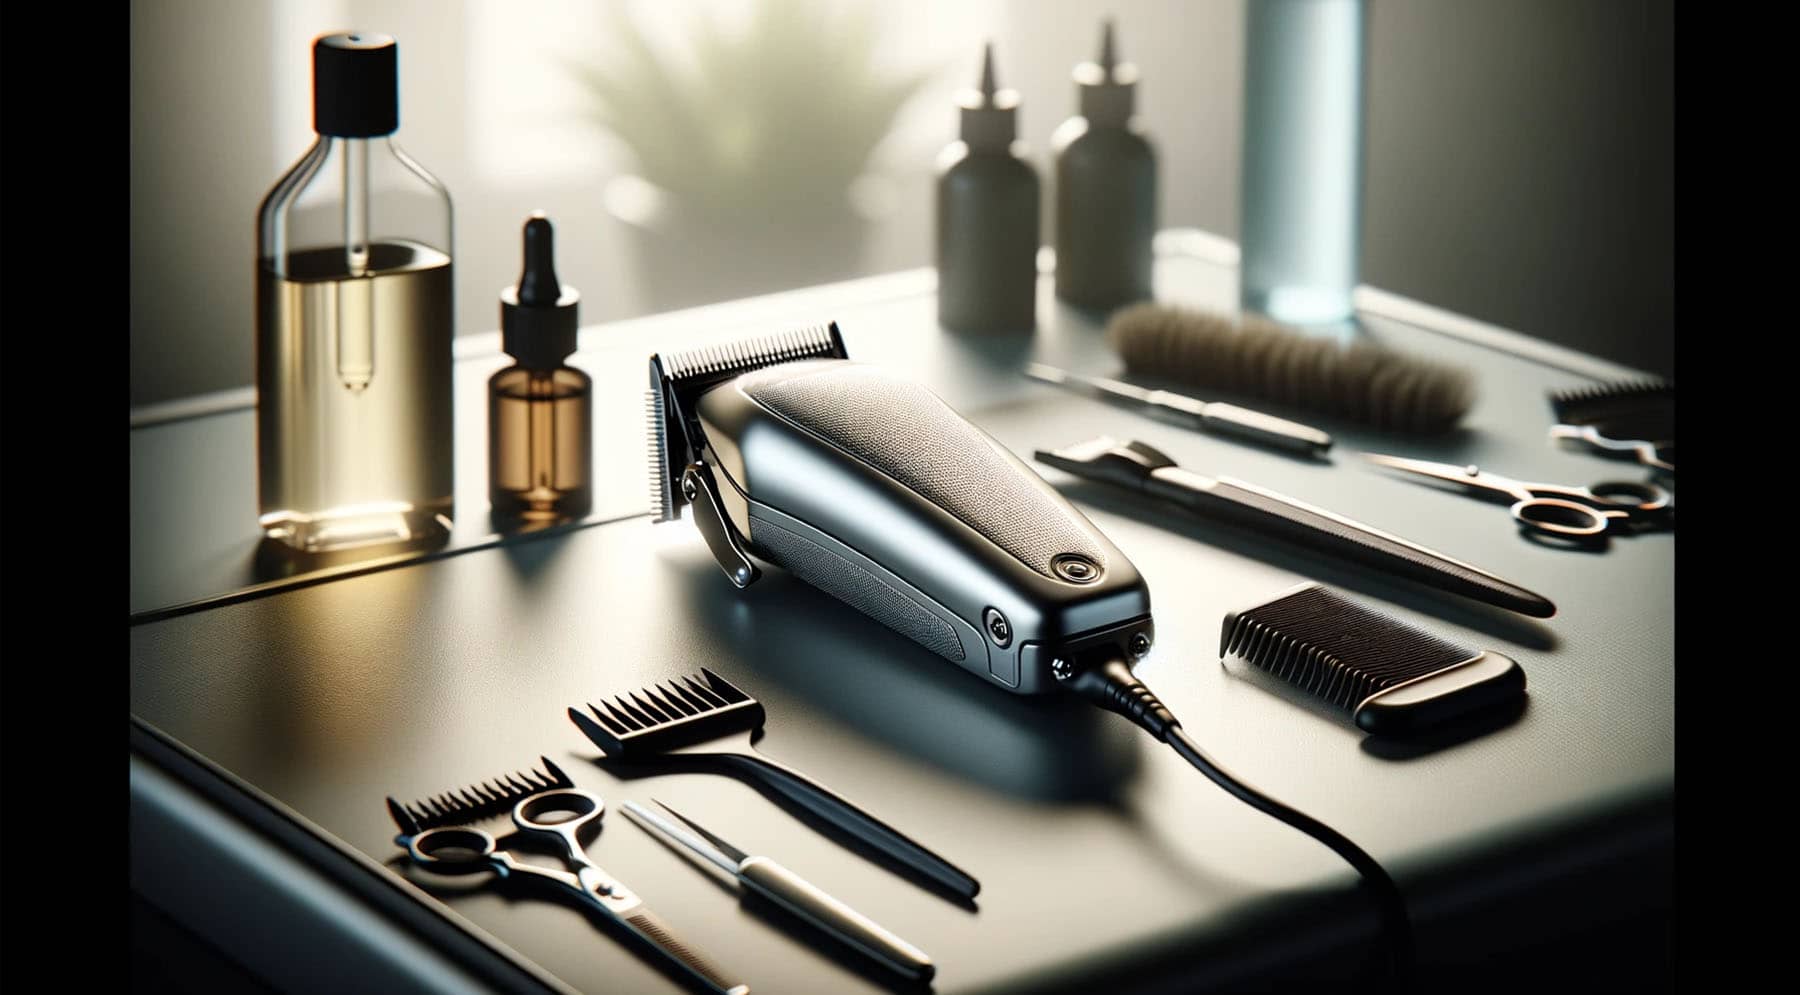 Quiet hair clippers and maintenance tools on a barber's workstation